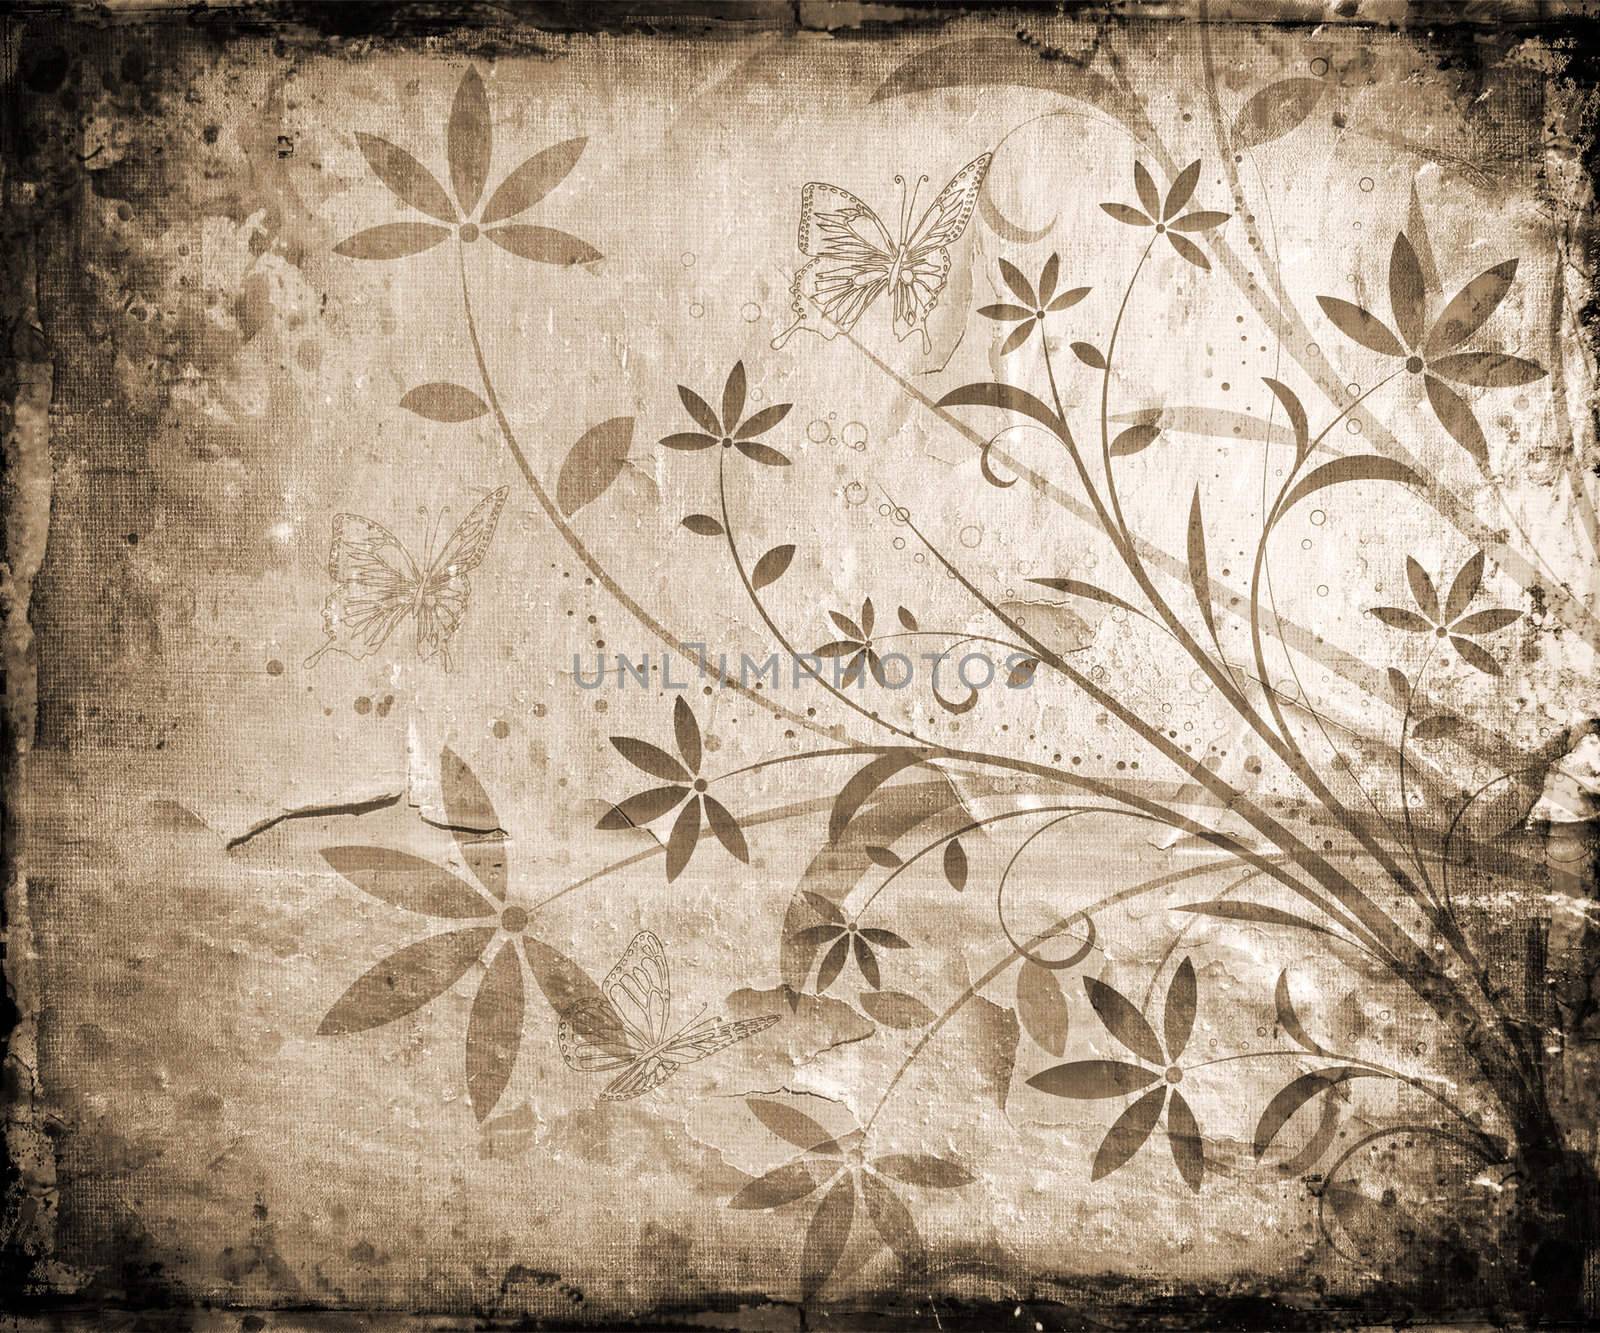 Abstract floral design with butterflies on grunge background